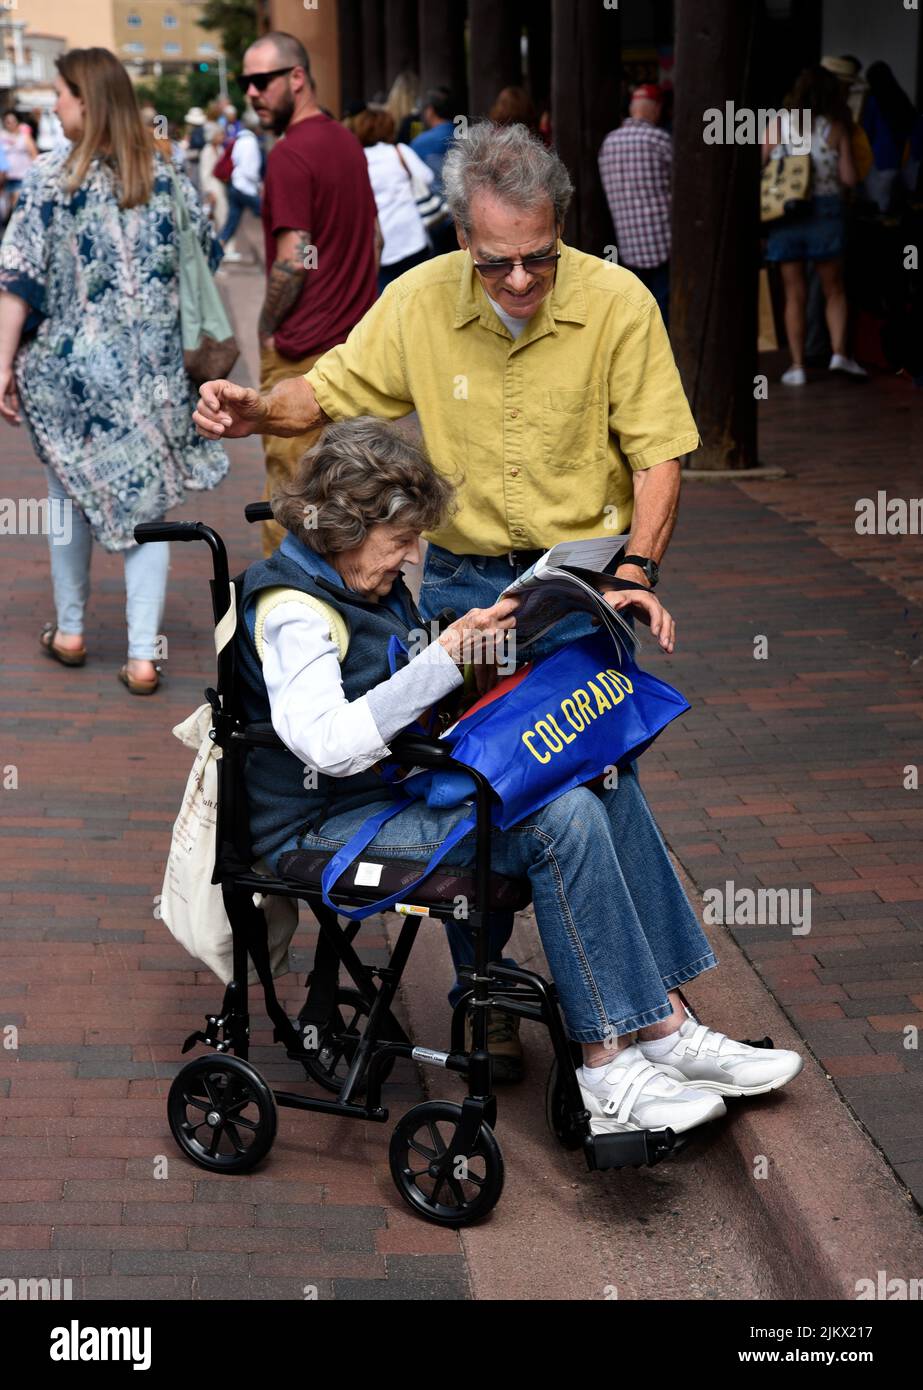 An elderly woman and her husband use a transport chair, or transport wheelchair, as they visit an outdoor arts festival in Santa Fe, New Mexico. Stock Photo